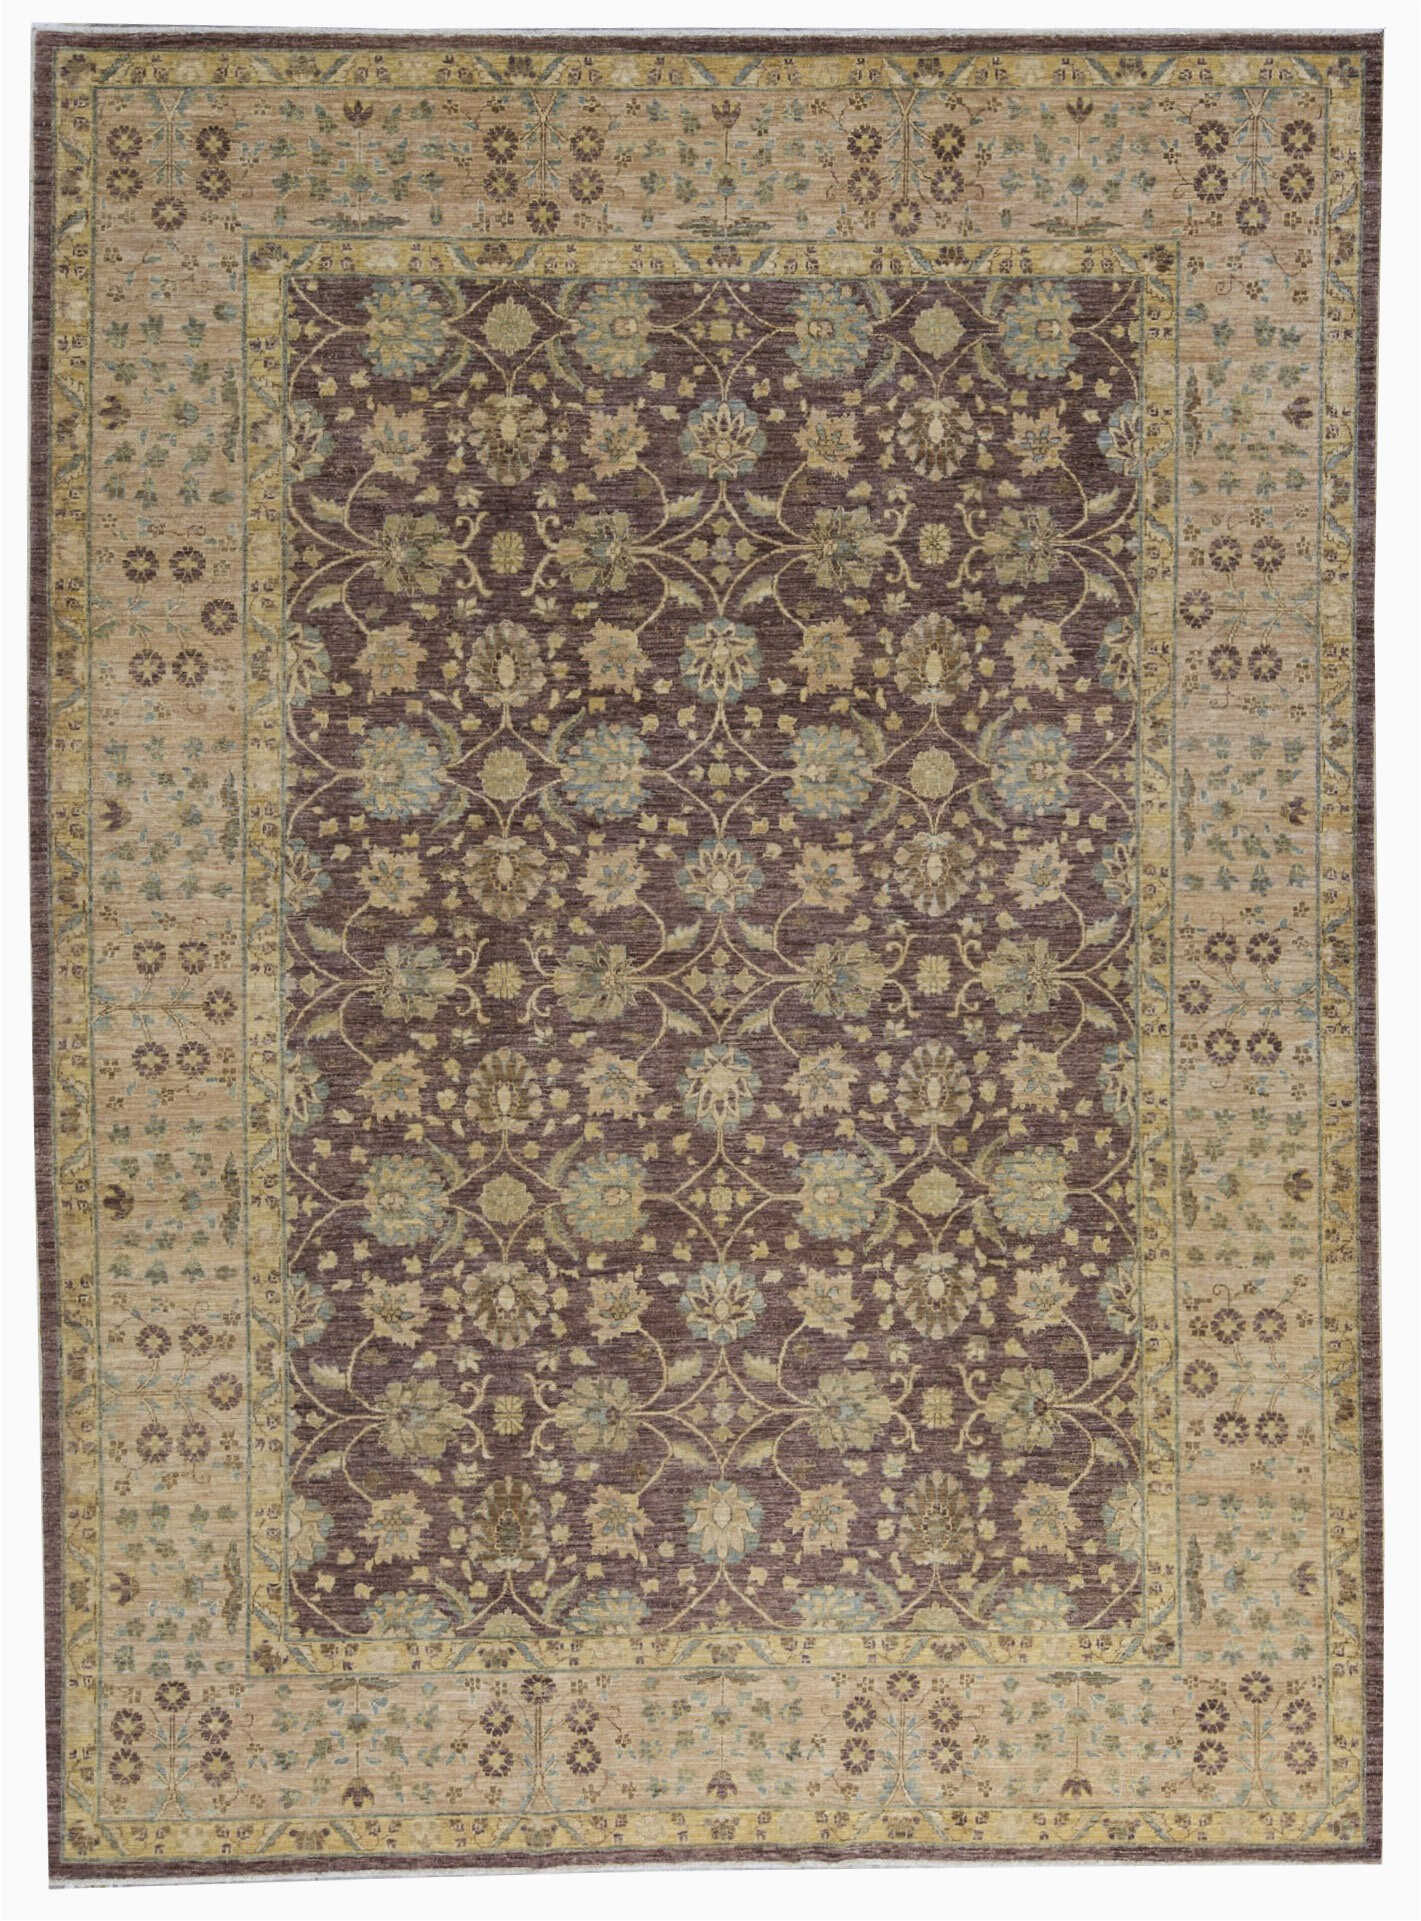 10 by 11 area Rug E Of A Kind Hand Knotted Brown Gold 8 10" X 11 11" Wool area Rug